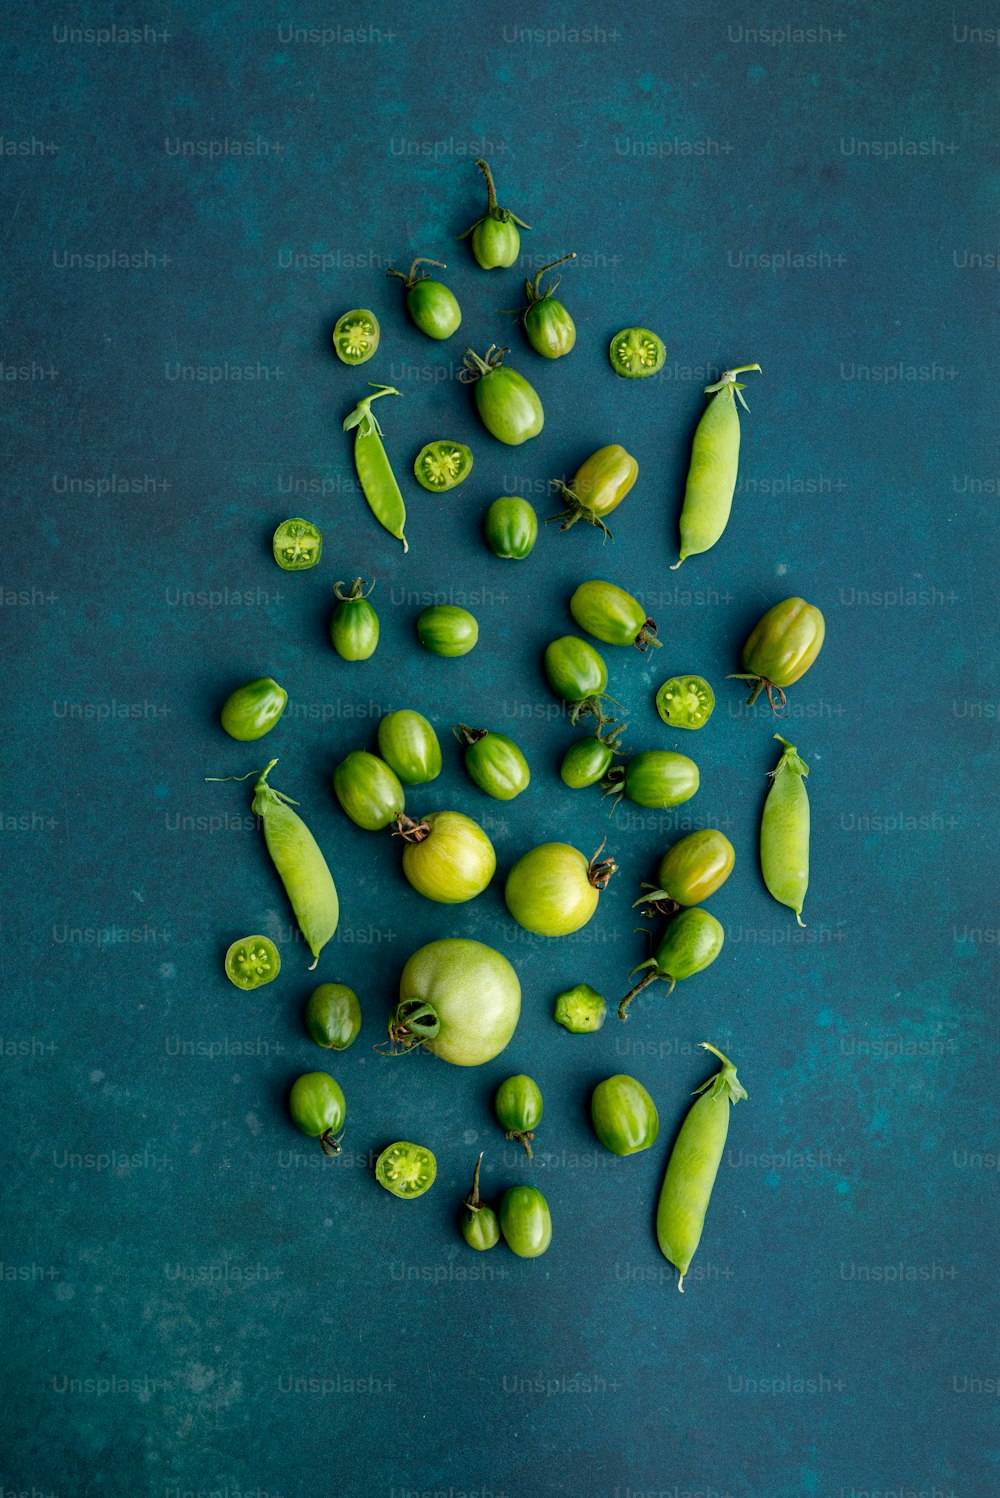 a group of green fruits and vegetables on a blue surface